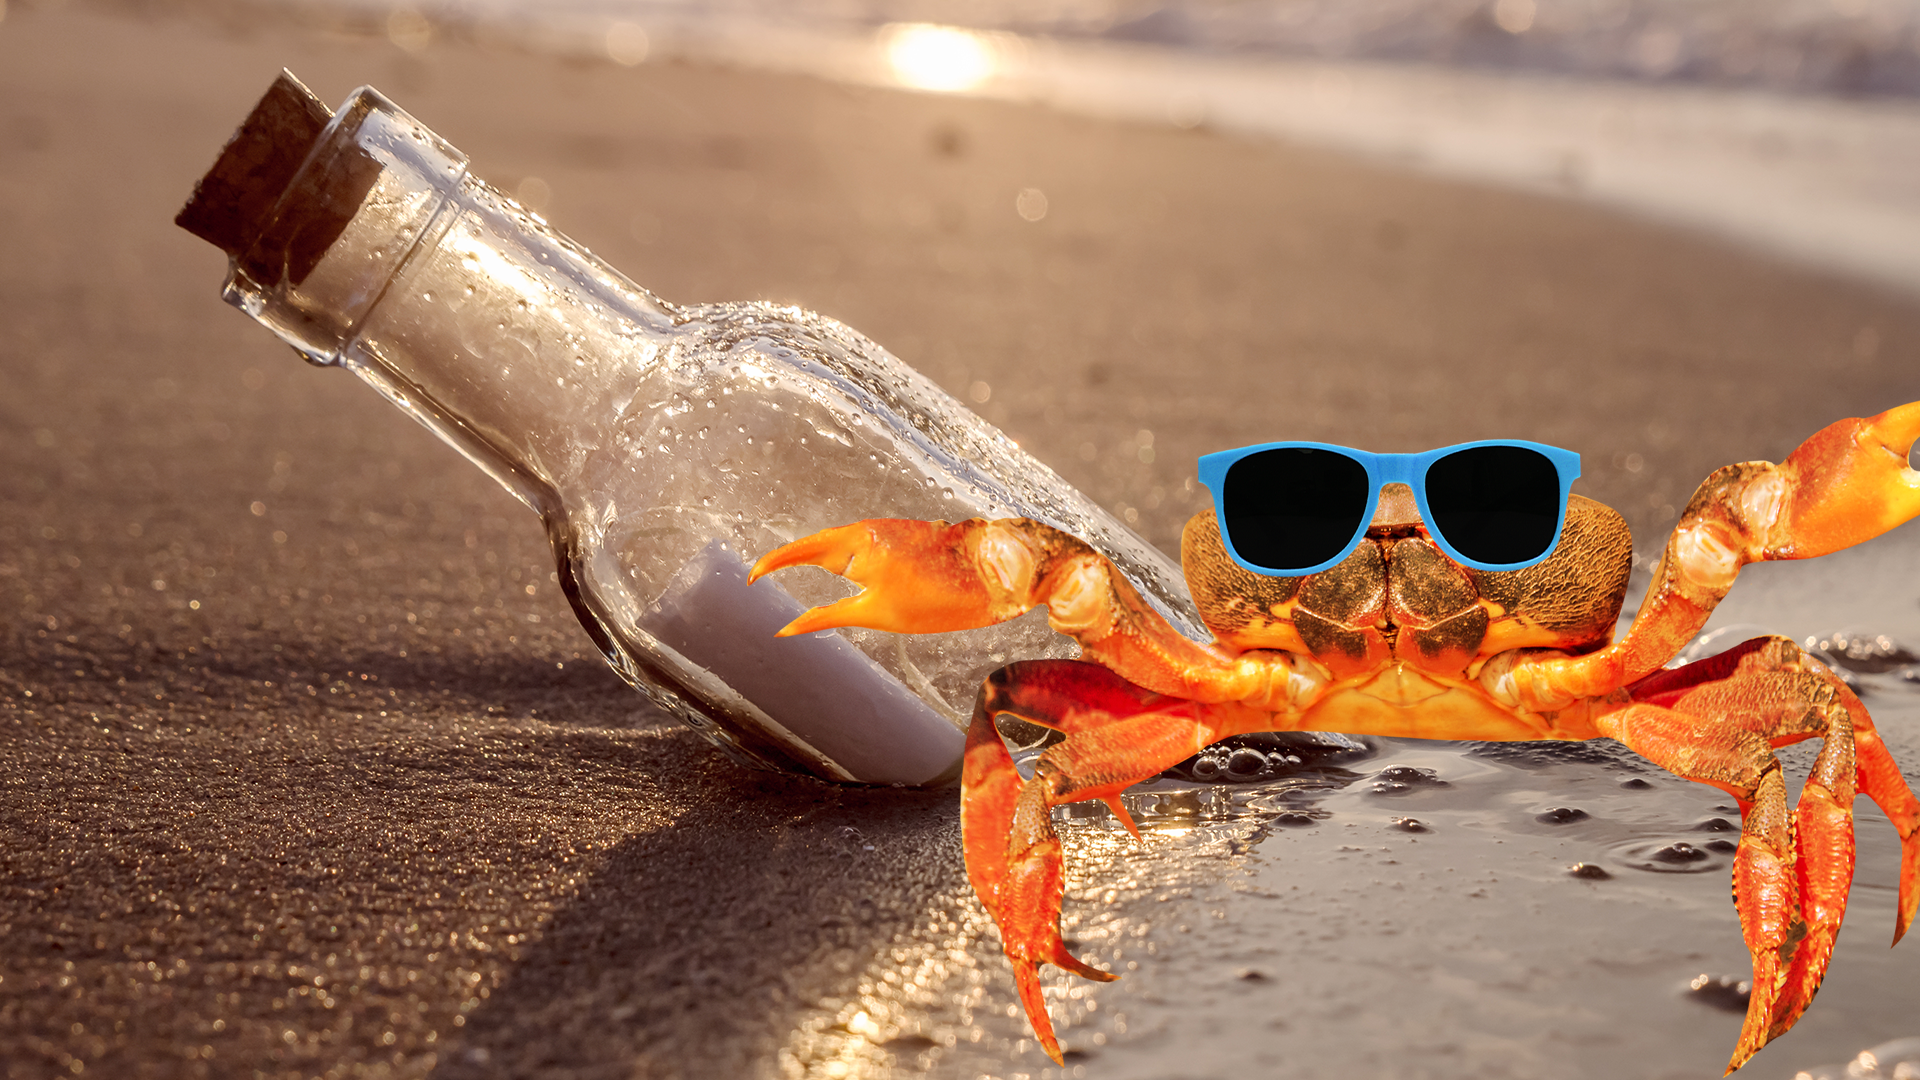 Message in  bottle on beach with cool crab in sunglasses